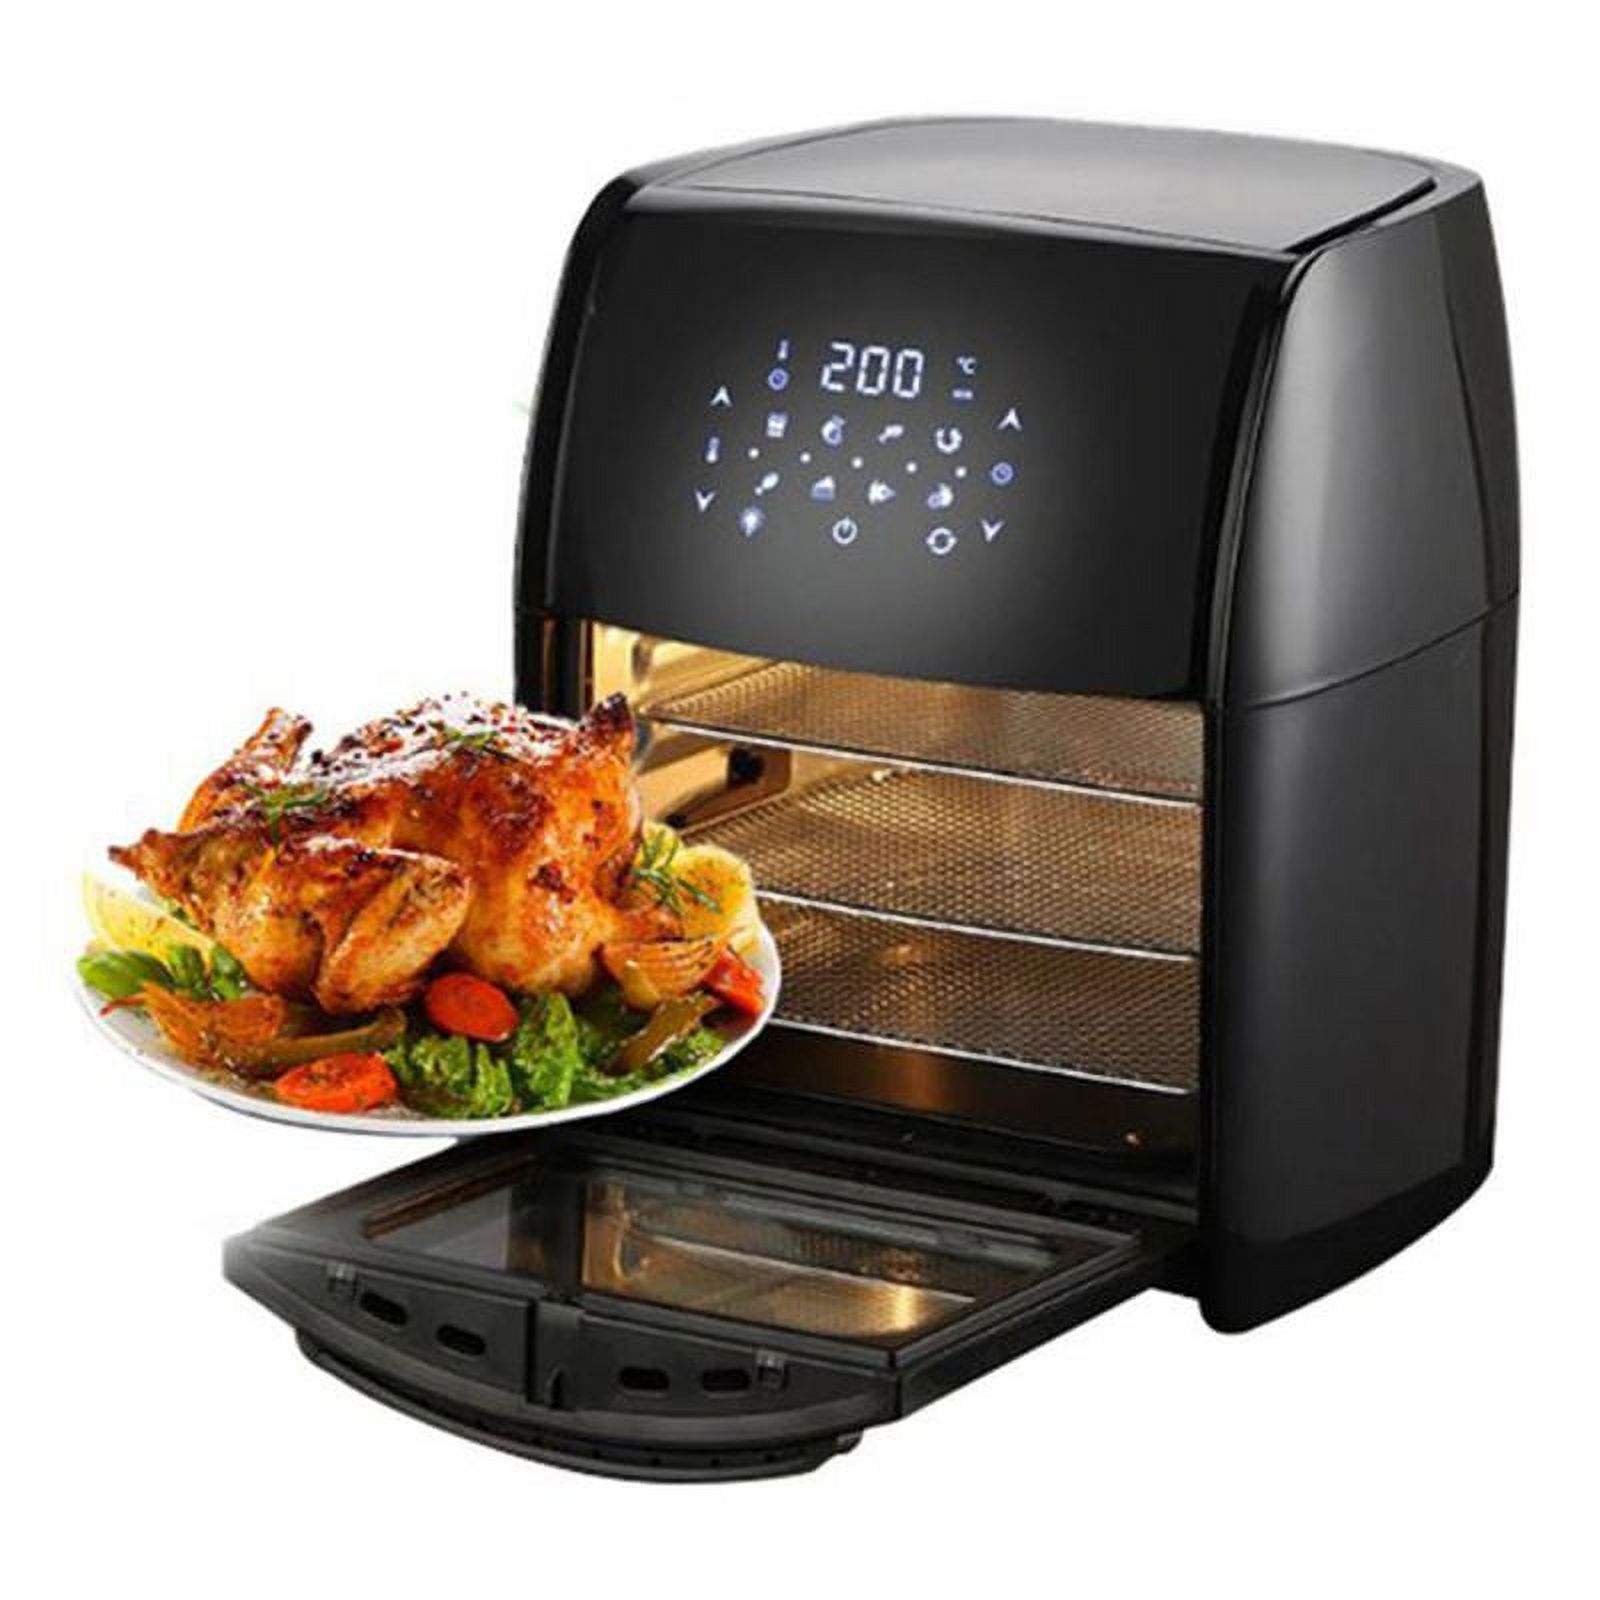 SOSPIRO 16.9qt Air Fryer Oven,1800W 8-in-1 Digital Large Air Fryer Countertop Oven, Rotisserie, Dehydrator and Baking Combo Oven - image 1 of 10